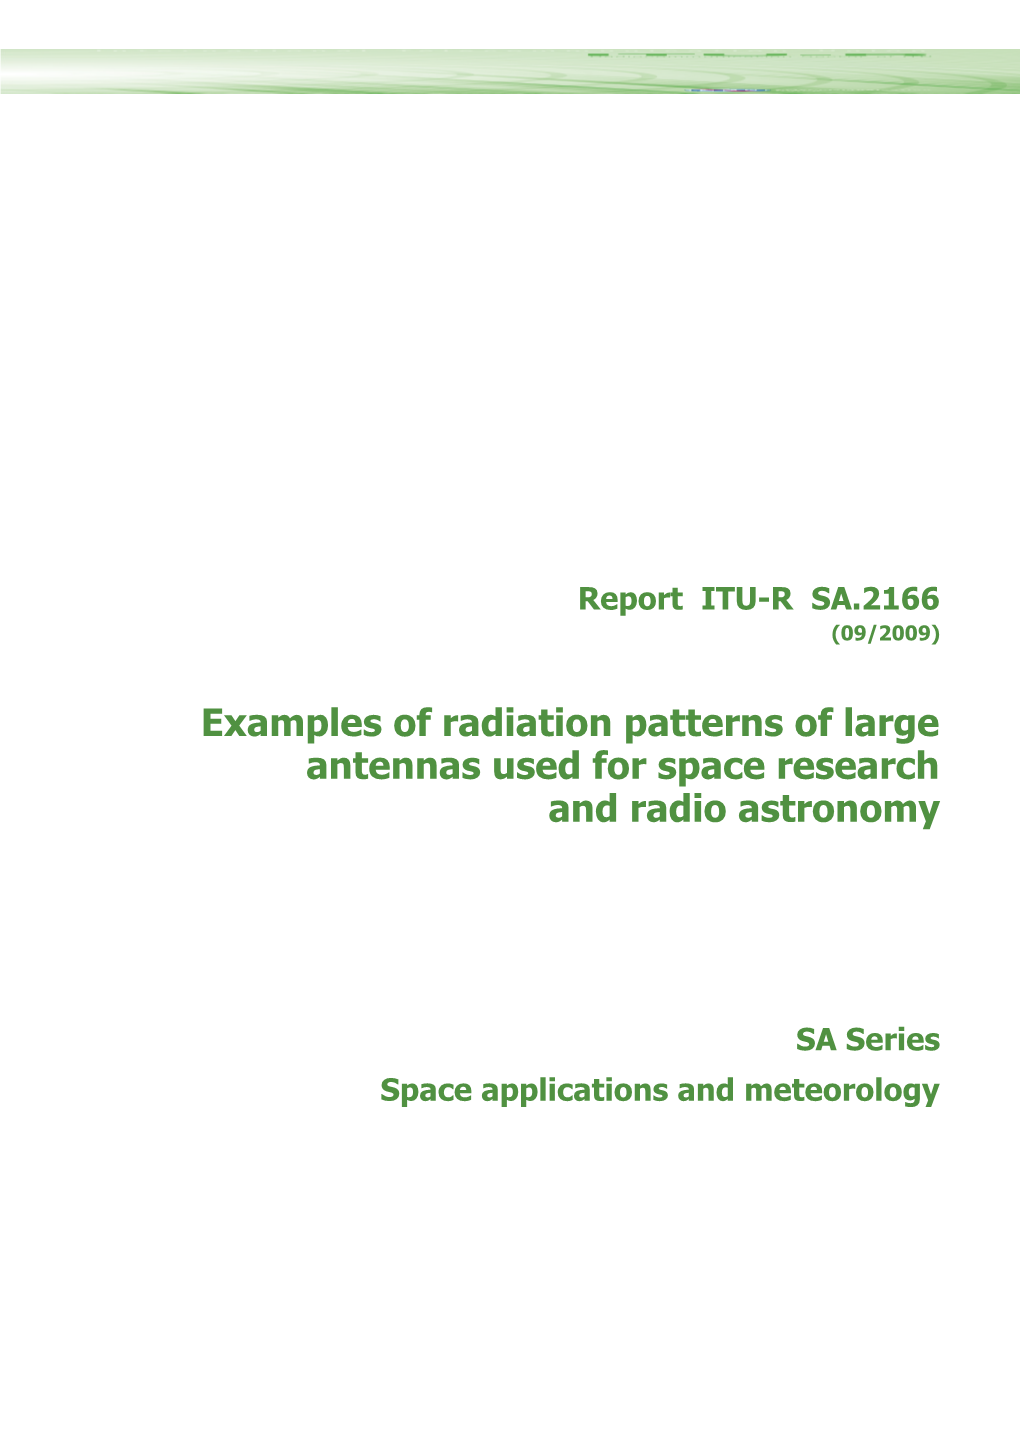 Examples of Radiation Patterns of Large Antennas Used for Space Research and Radio Astronomy